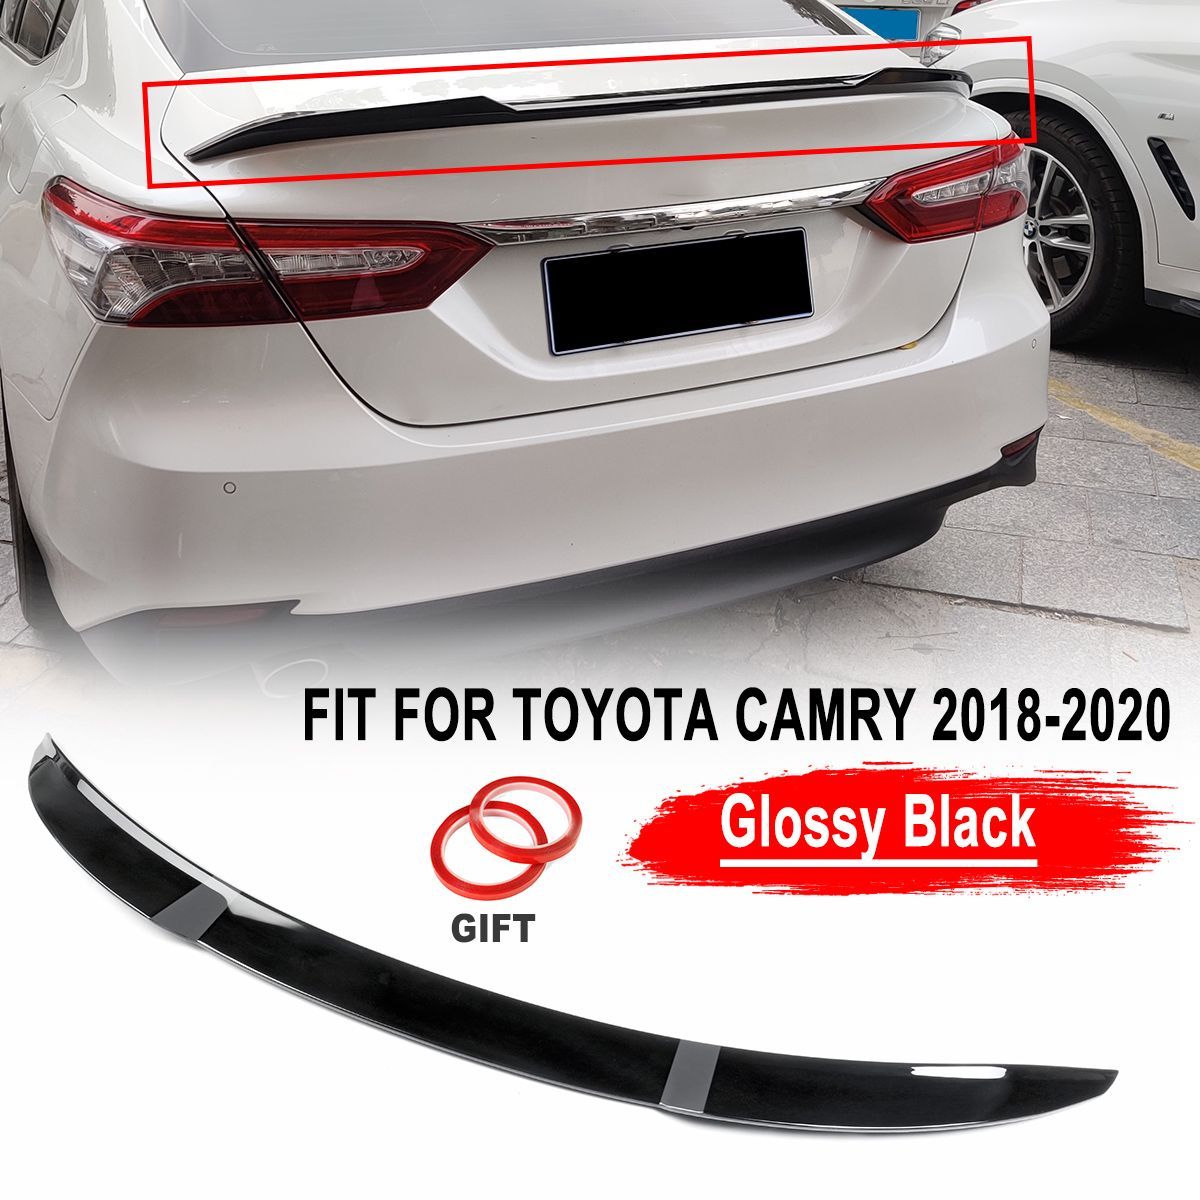 Glossy-Black-M4-Style-Rear-Trunk-Lid-Spoiler-For-Toyota-Camry-Se-Xse-Le-Xle-2018-2020-1681510